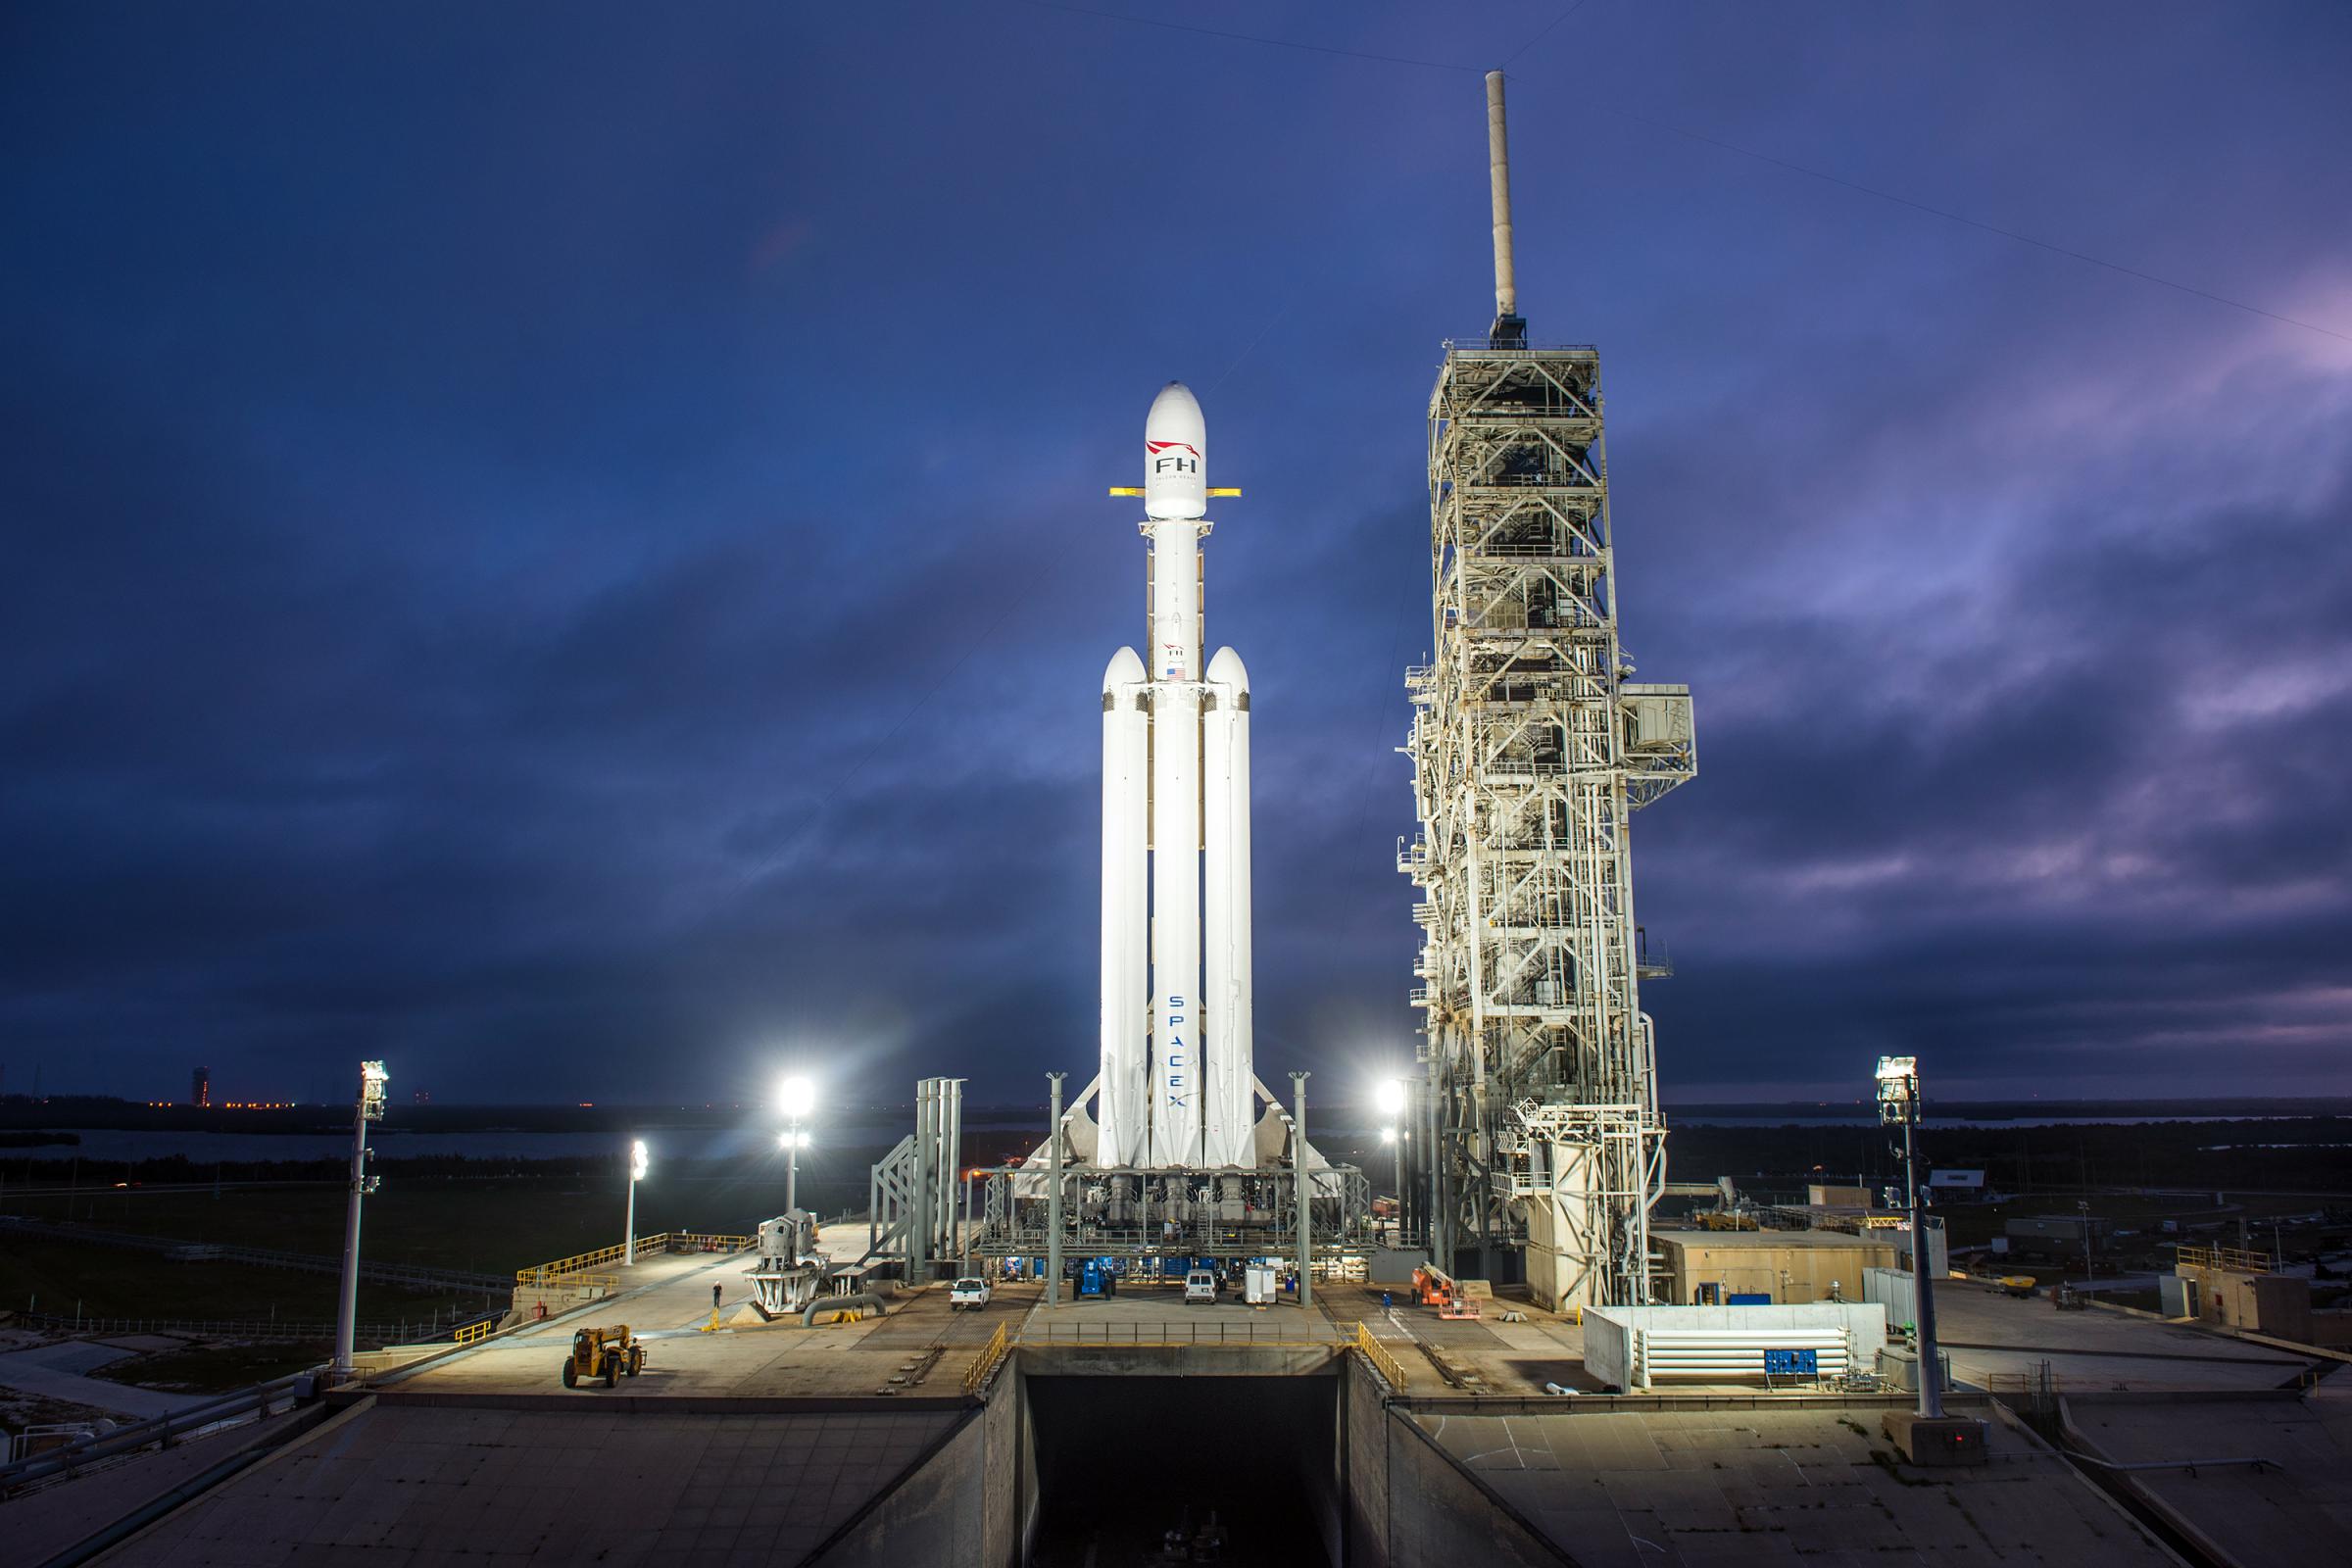 Big bird, big promises: The Falcon Heavy must live up to a lot of hype